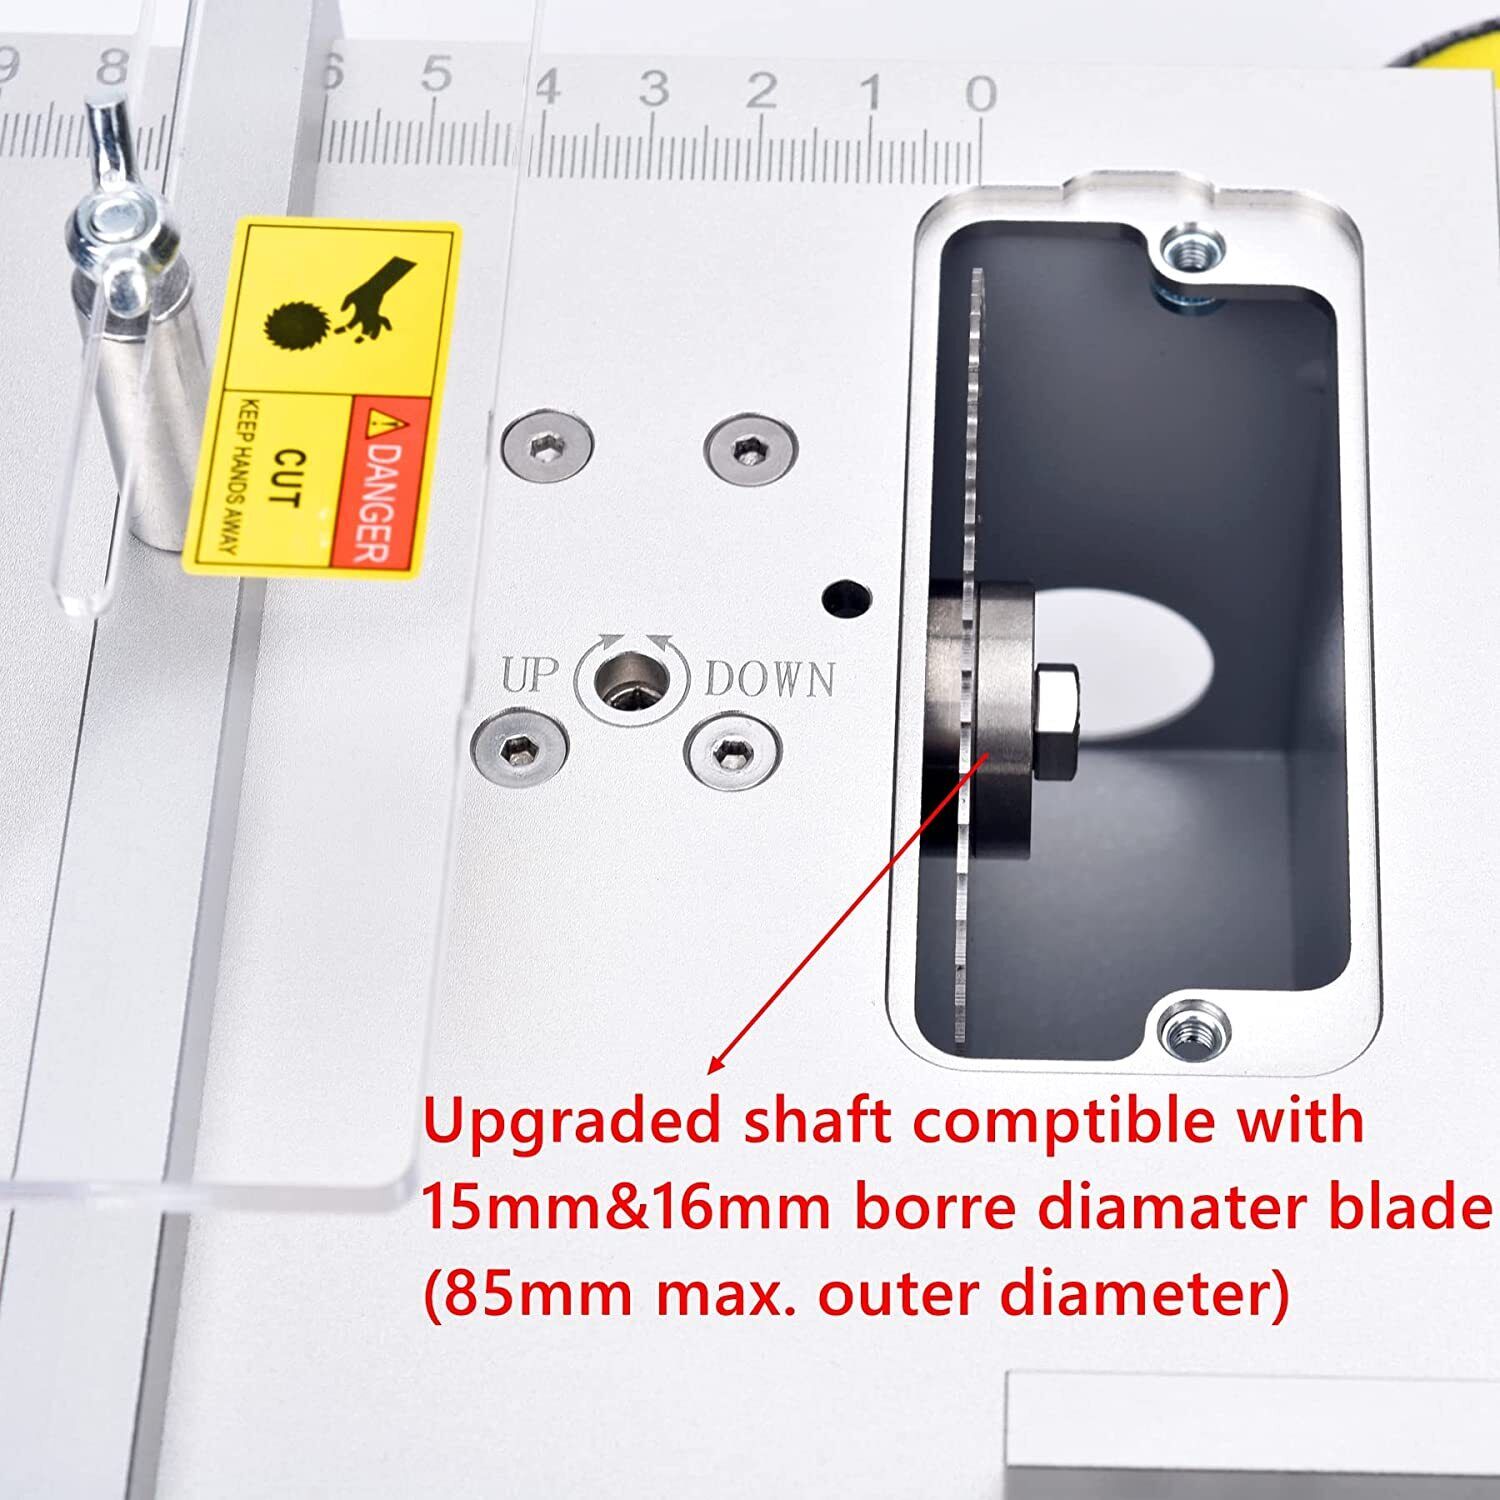 TOPCHANCES Mini Hobby Table Saw with Miter Gauge, 2.5 Inch HSS Alloy Steel  Circular Saw Blade,96W Adjustable-Speed Power Supply for DIY Handmade Wooden  Model Crafts